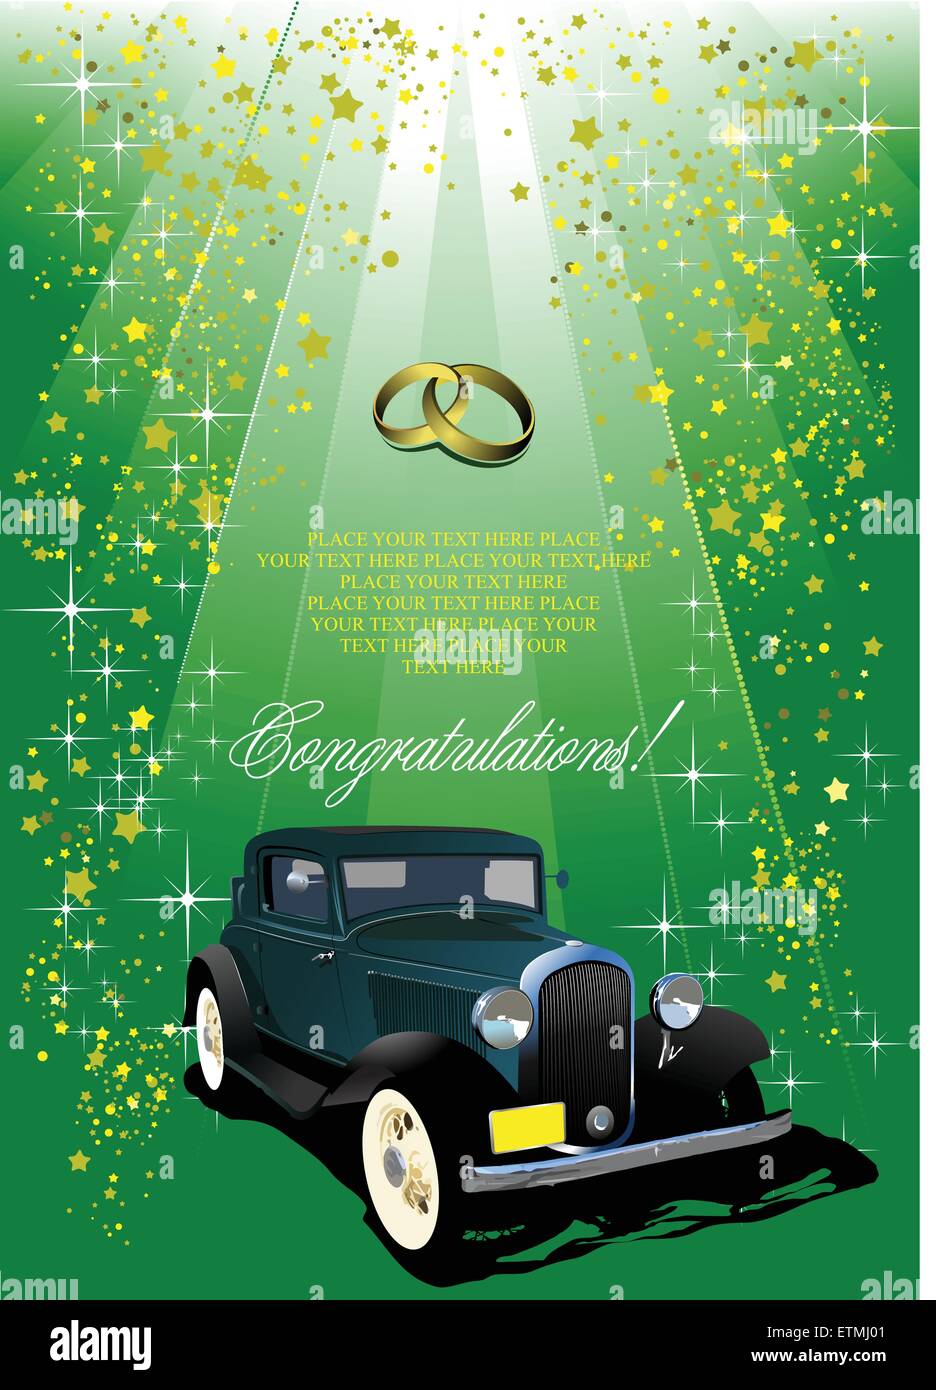 Wedding green background with rarity car image Stock Vector